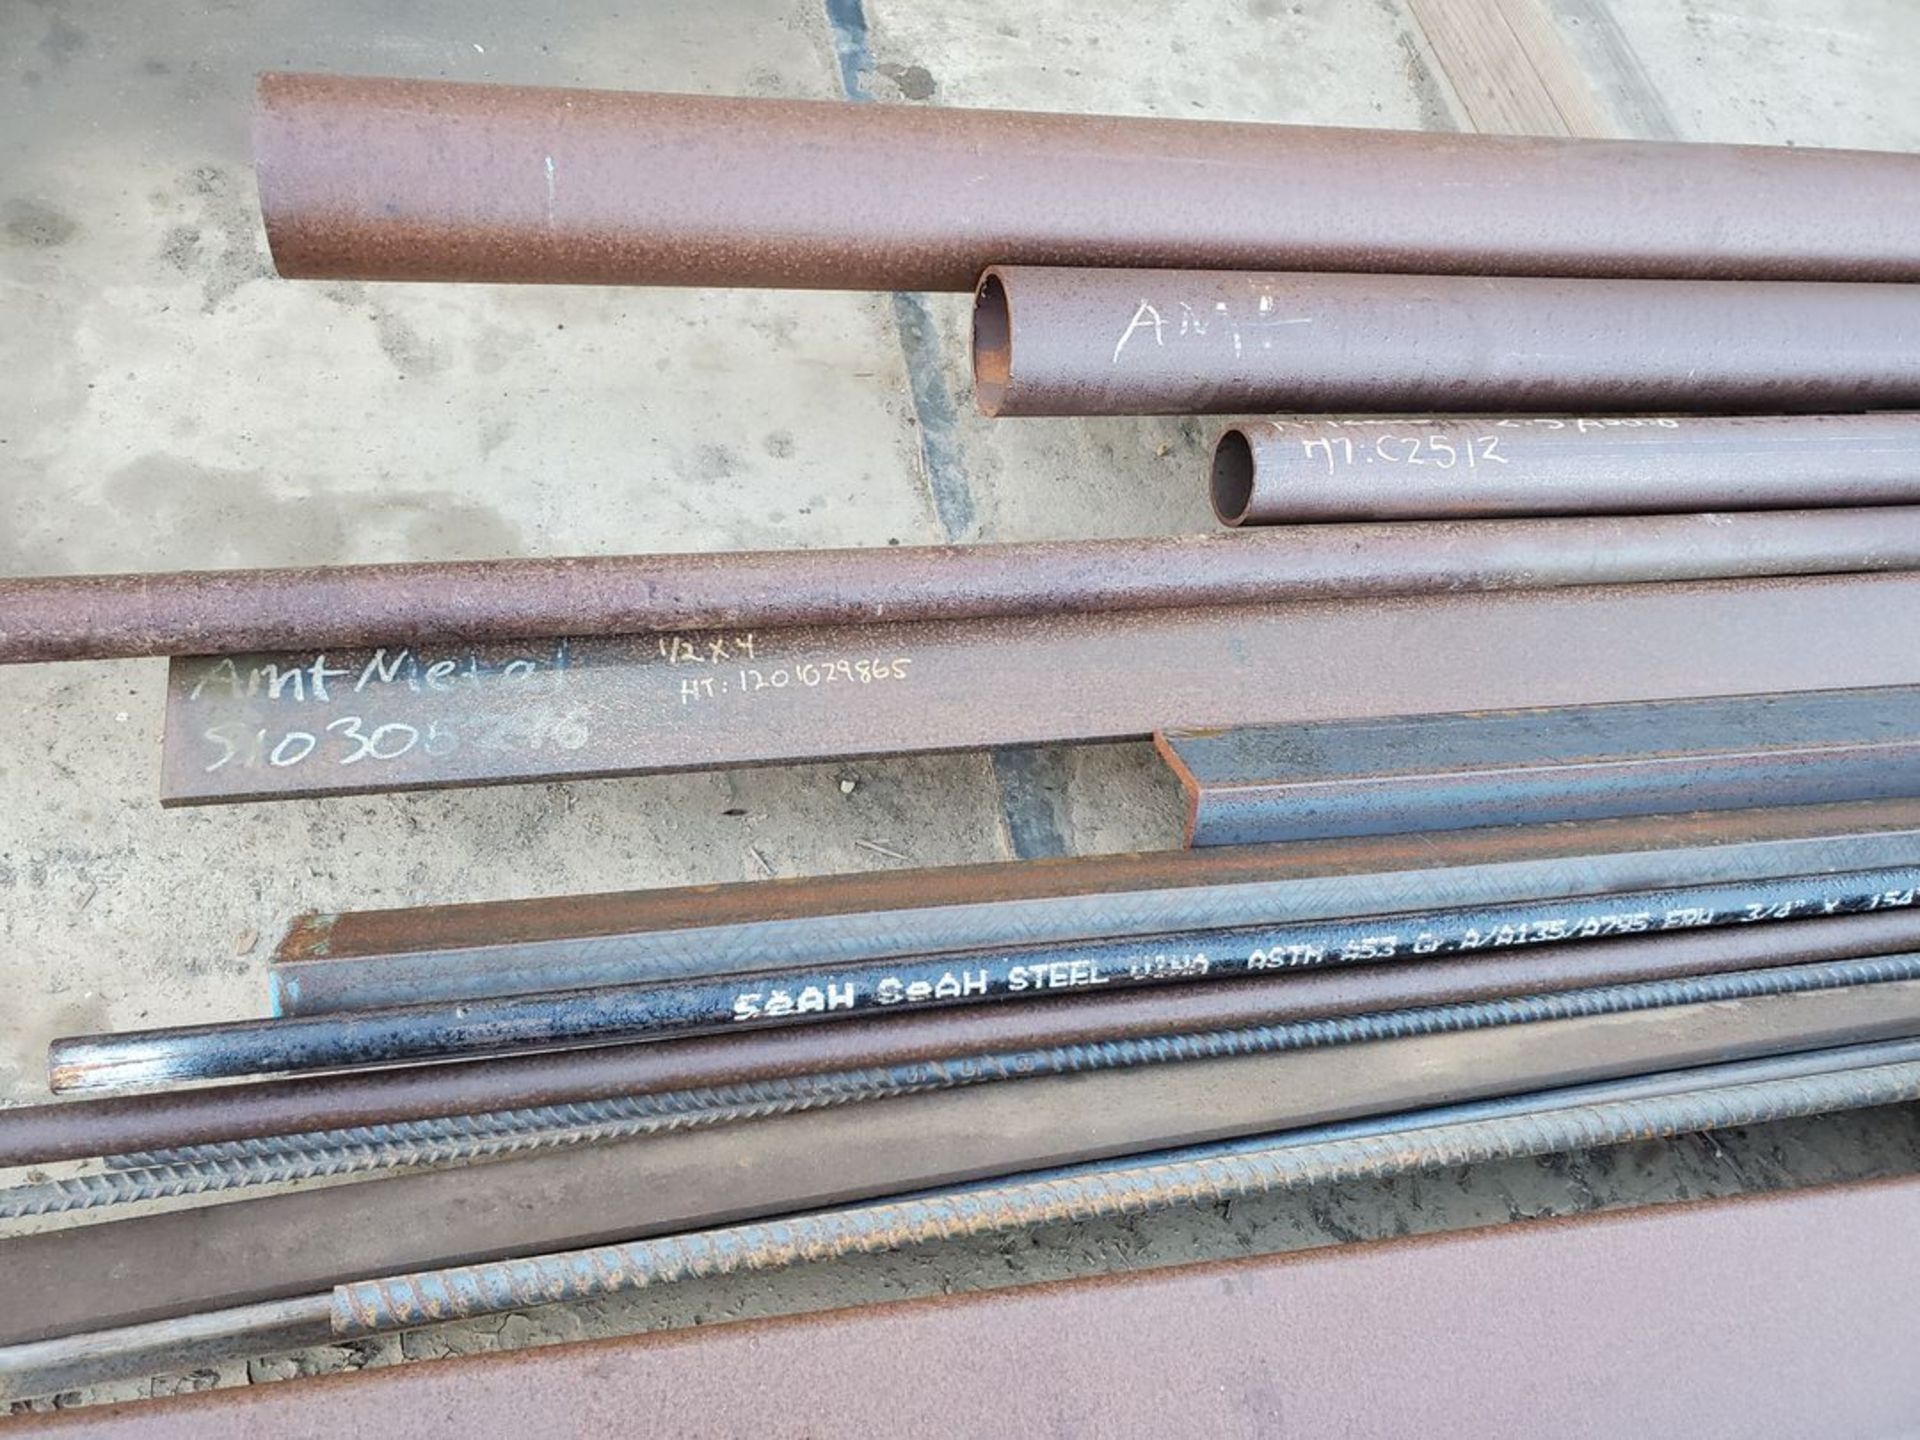 Assorted S/S Raw Matl. To Include But Not Limited To: Rebar, Pipe, Flat Bar, Angle, Sq. Tubing, Up - Image 8 of 14